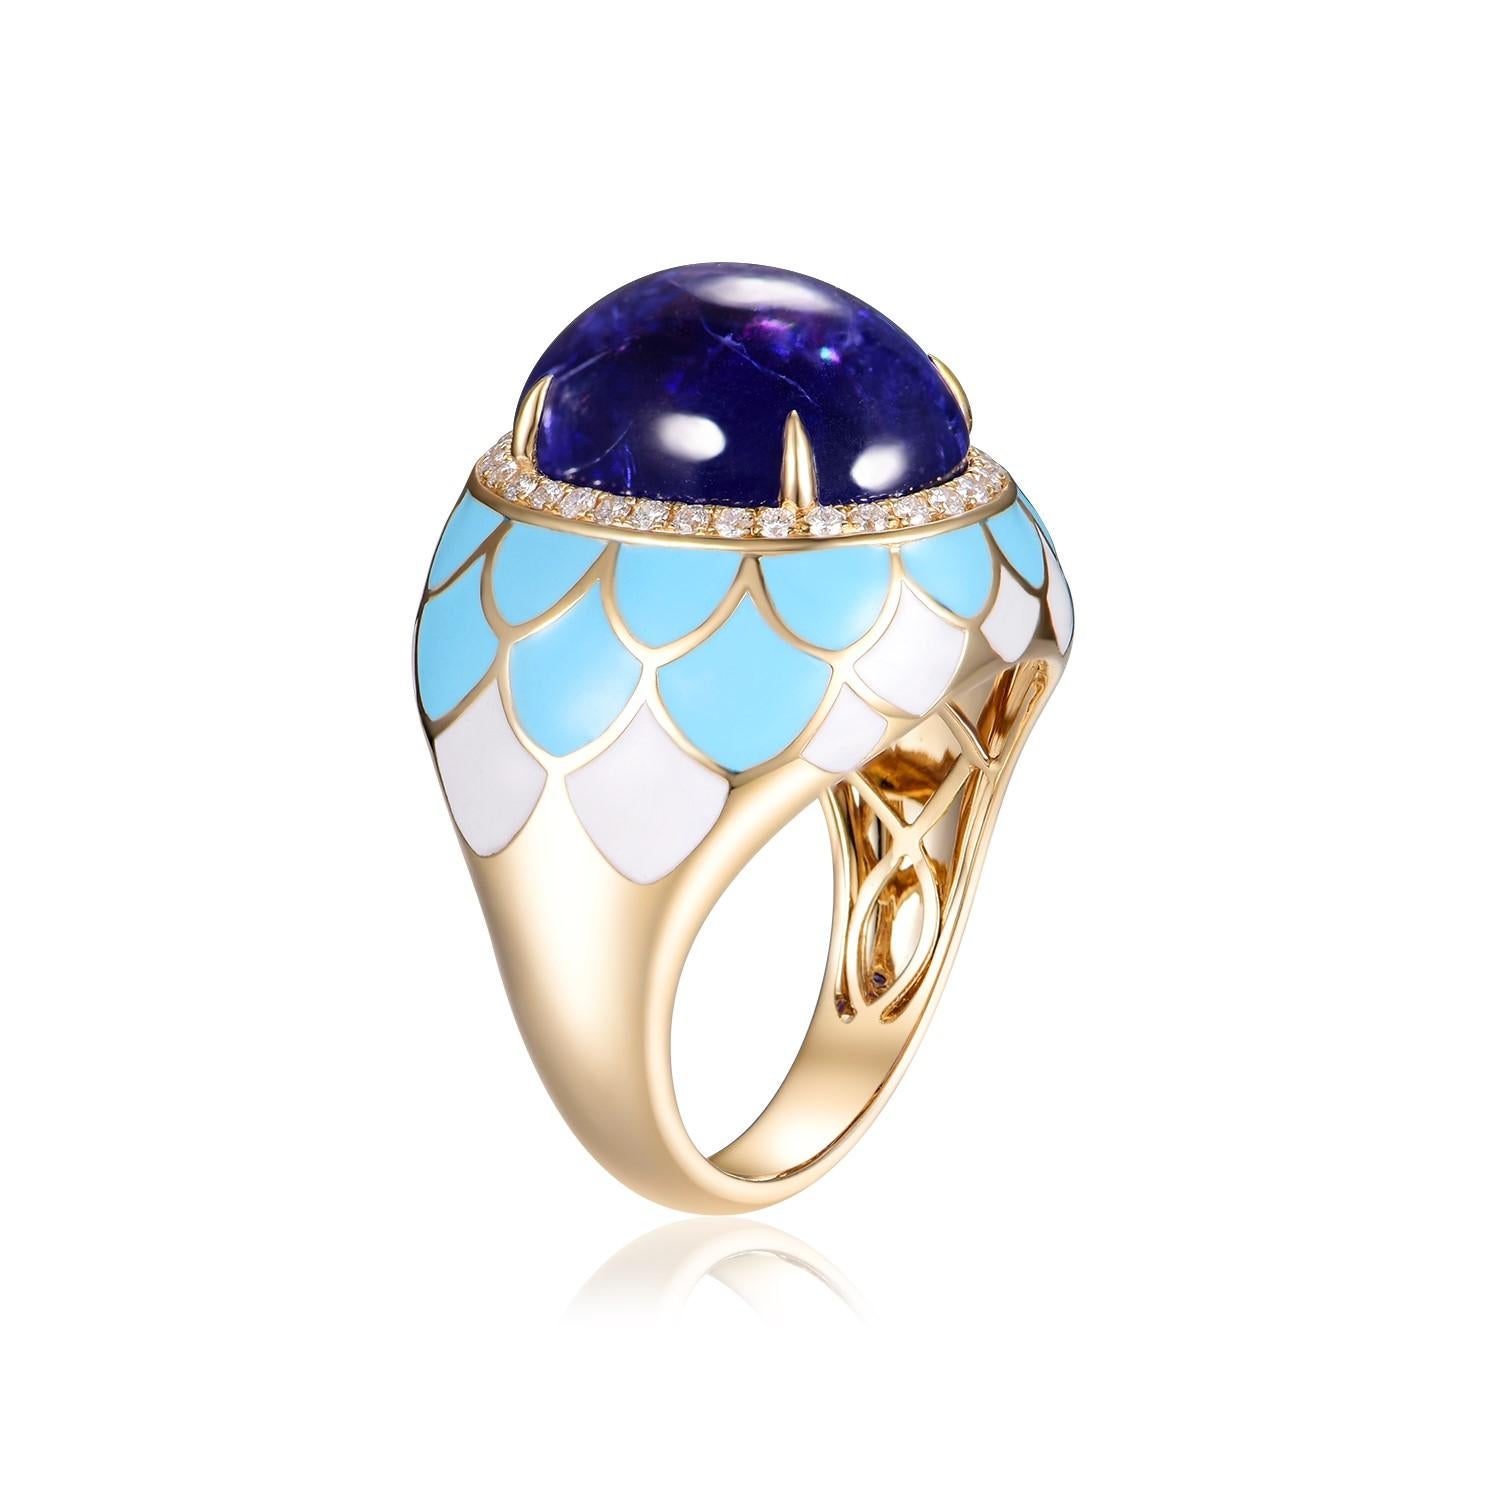 This ring, a size US 6.5 with the option for resizing, is a celebration of color and craftsmanship. At its zenith sits an 11.06-carat tanzanite, captivating with its deep blue-violet tones, symbolic of grandeur. This sizable gemstone is polished to